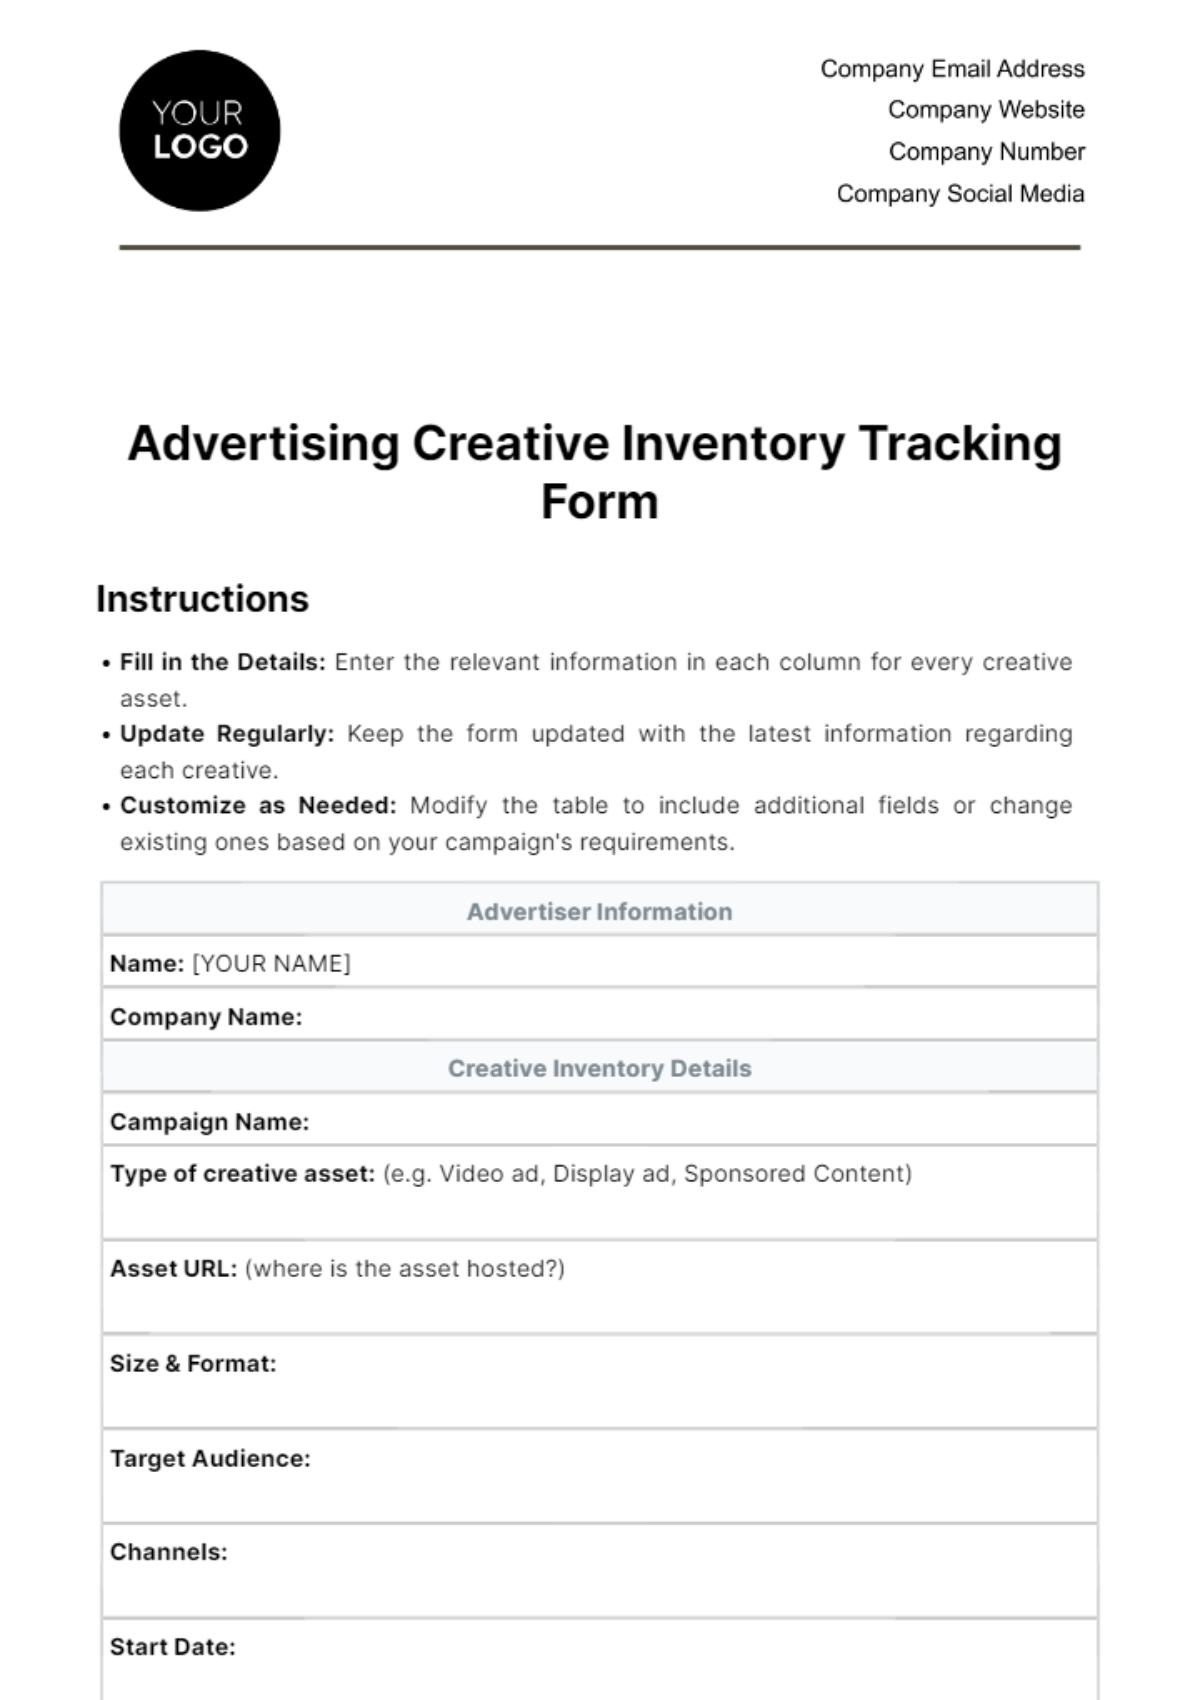 Free Advertising Creative Inventory Tracking Form Template